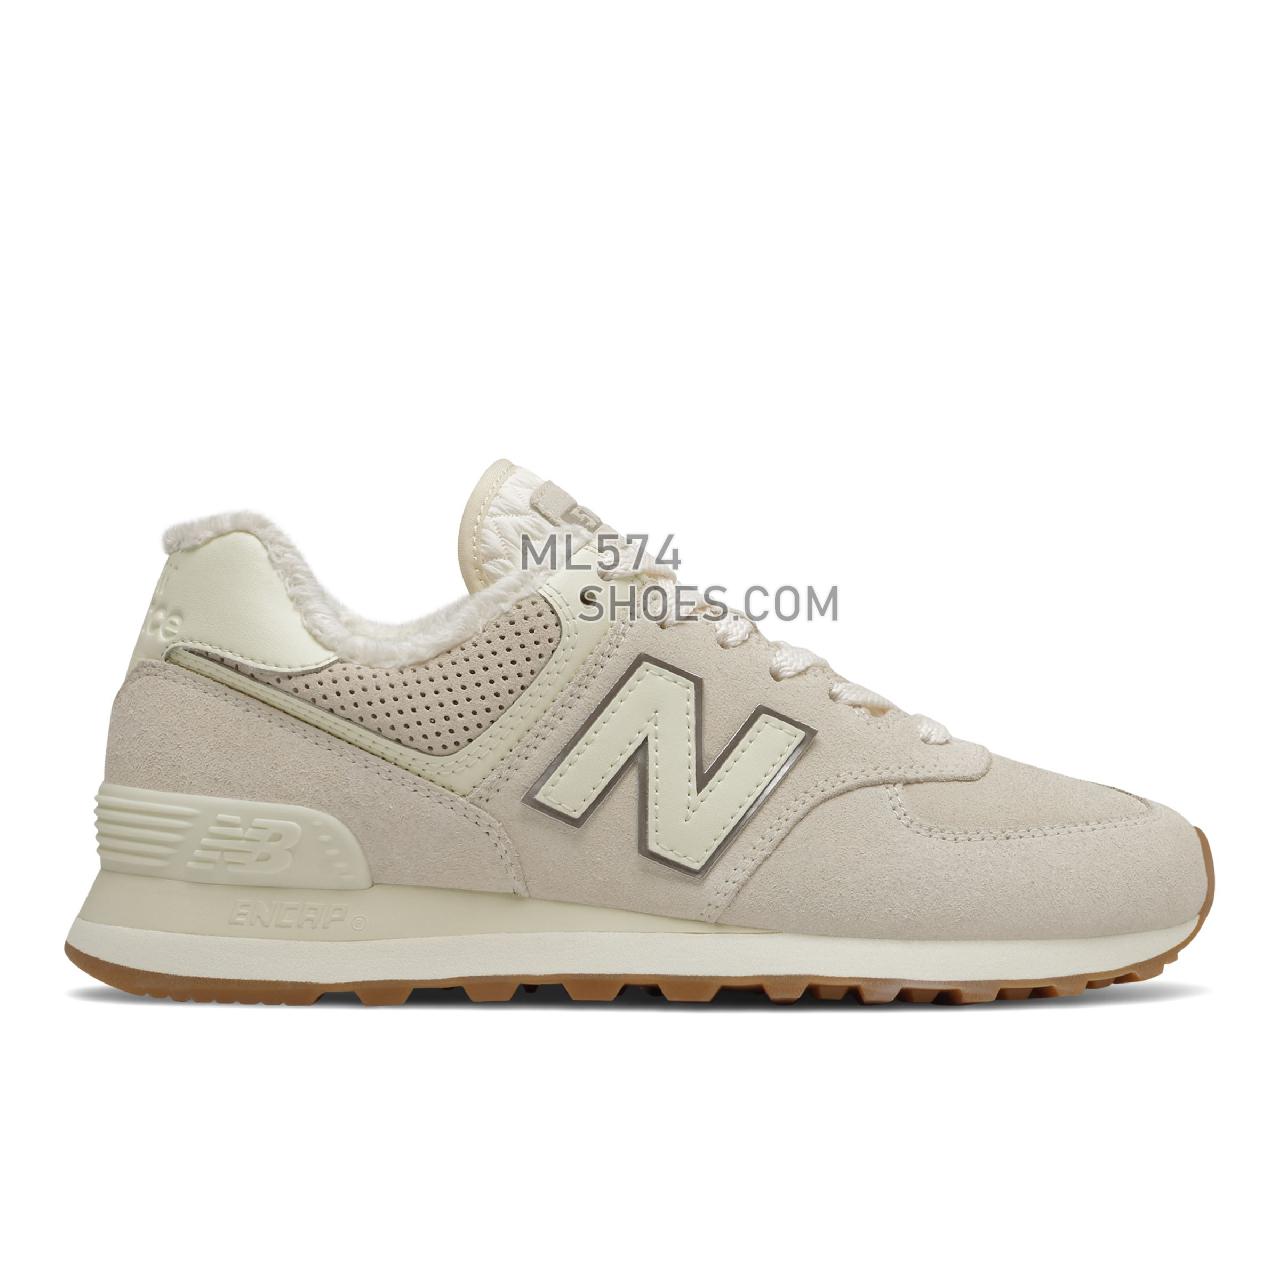 New Balance 574 - Women's Classic Sneakers - Angora with Gold - WL574LY2